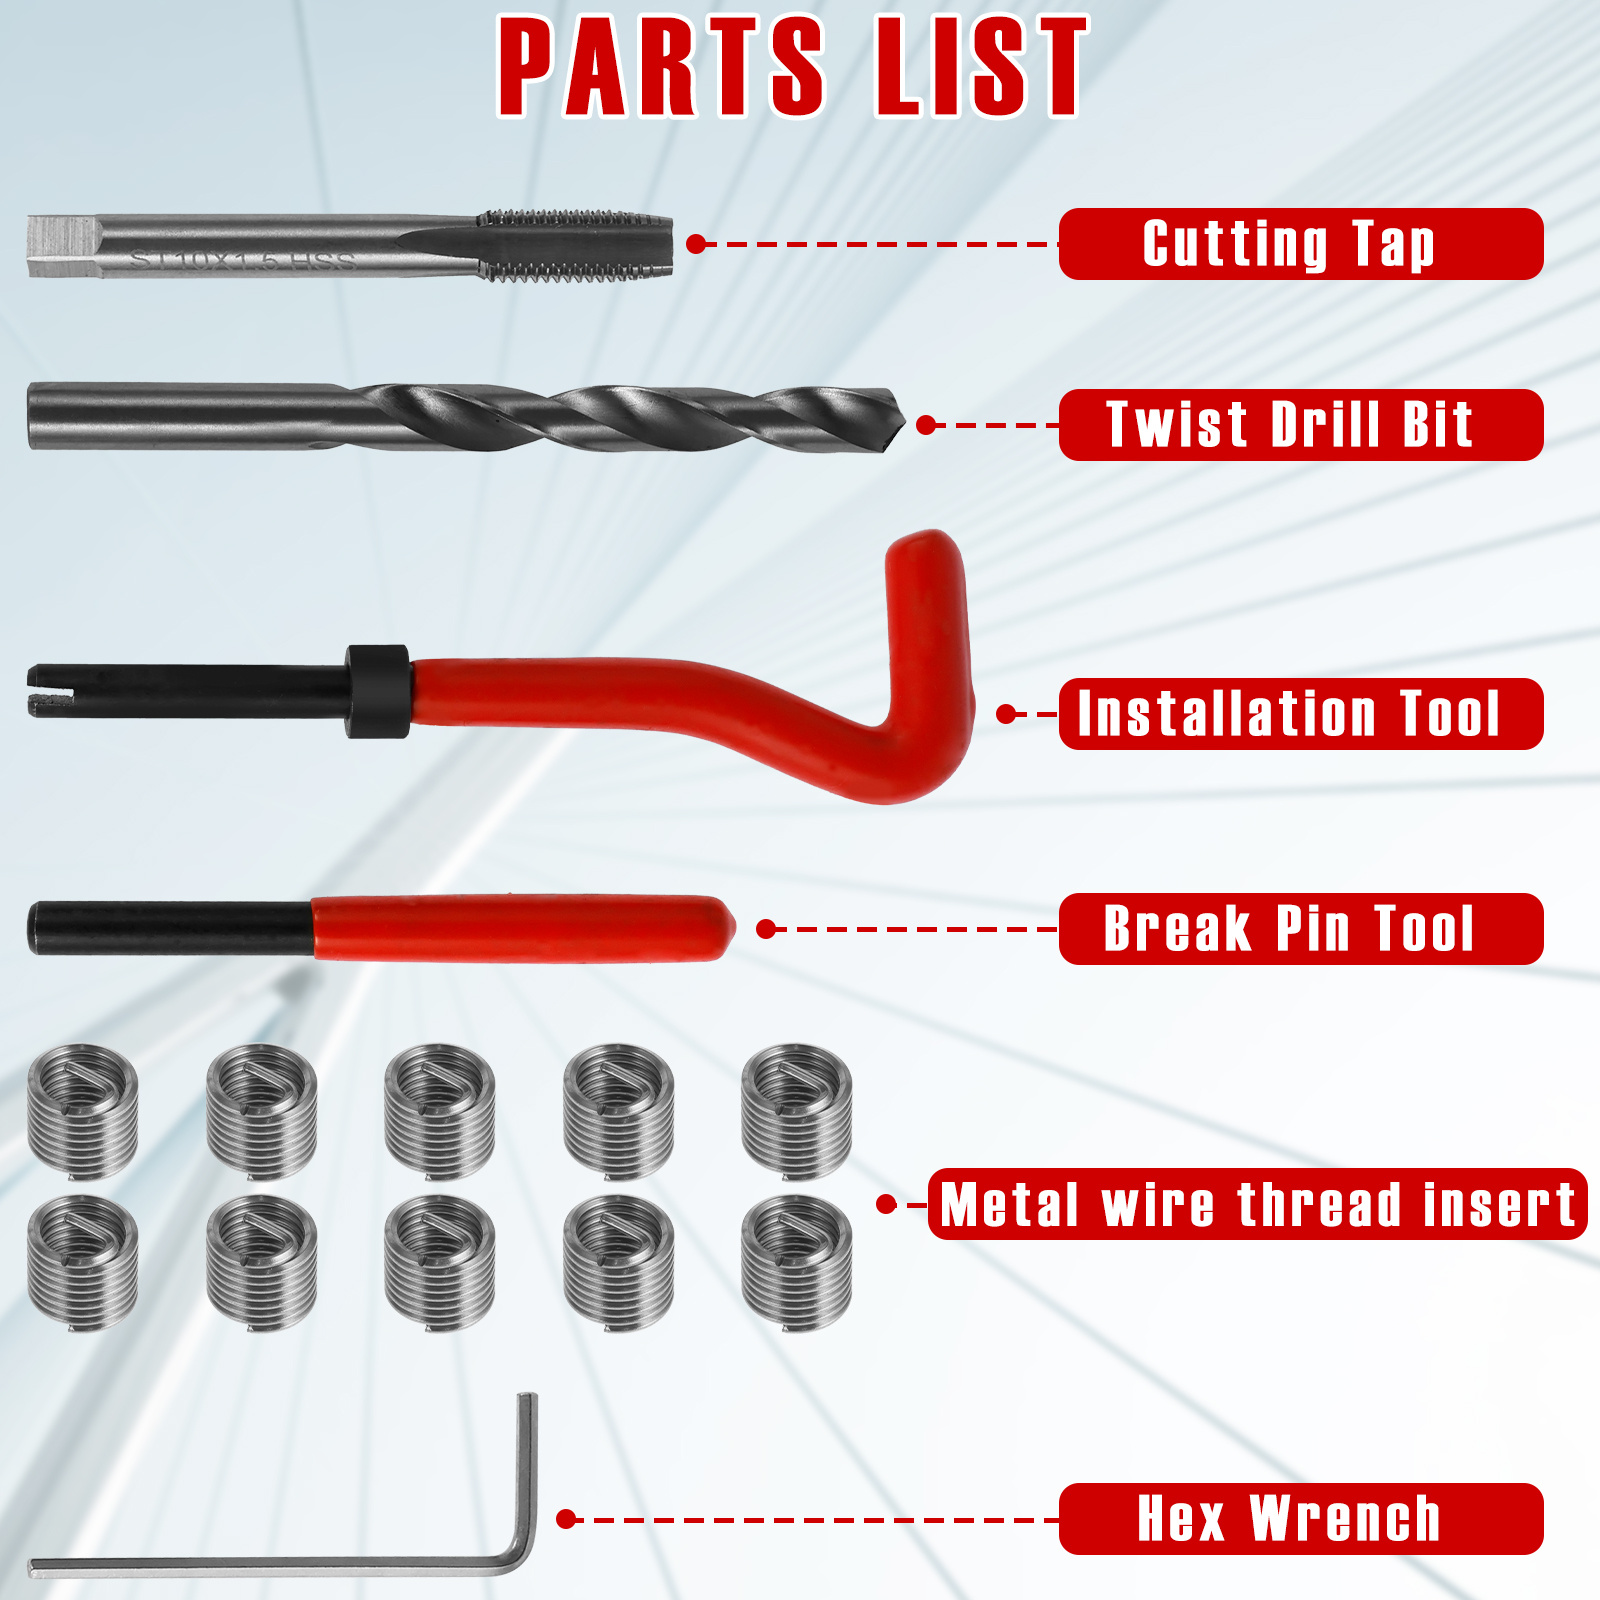 HELICOIL® manual installation tool